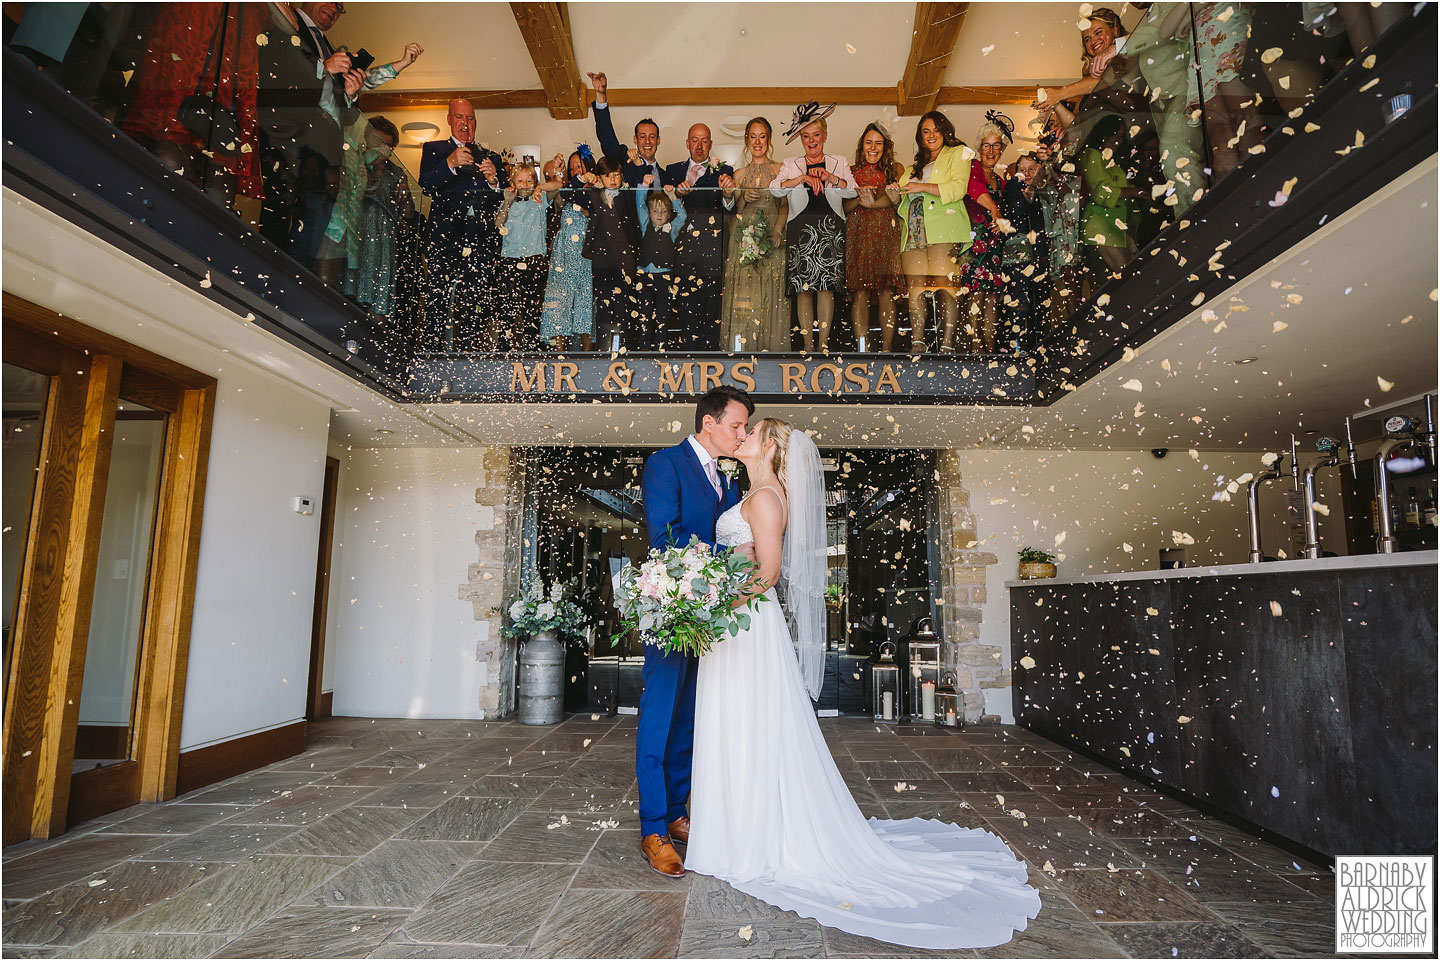 Priory Cottages balcony confetti photo 